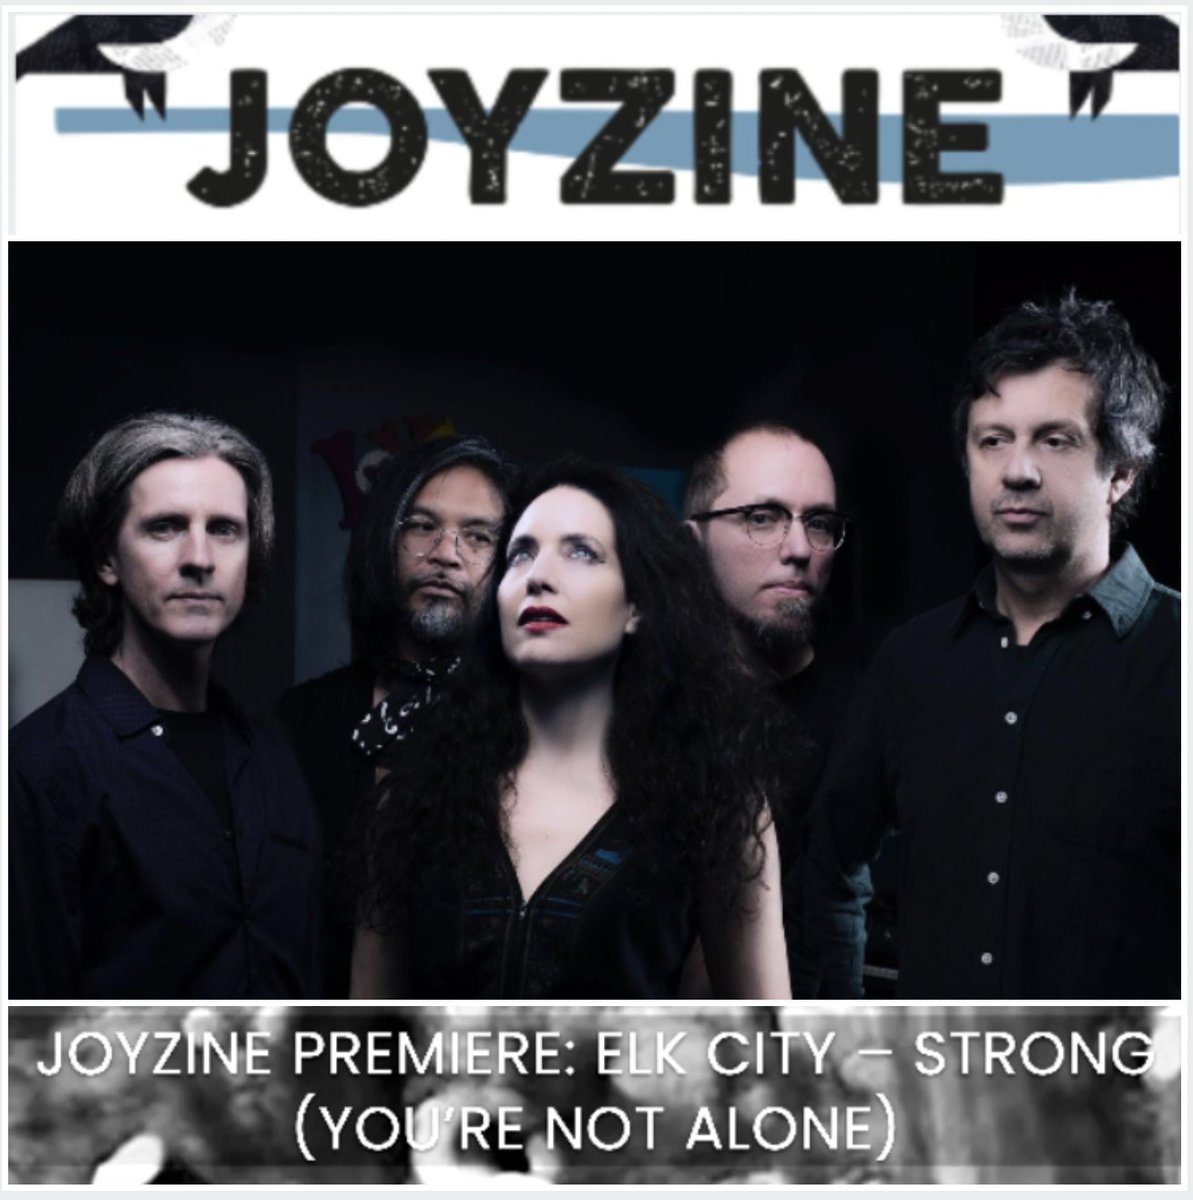 Big thanks to @JoyzineUK @paulfcook for this fabulous feature on 'Strong (You're Not Alone' by @ElkCityMusic, out on Wednesday via @MagicDoorMusic ~ tinyurl.com/yc4h8w65 #museboost @blazedrts @protestmusica @_teamblogger @musicblogrt @musiccity @itheretweeter1 @rayketchem